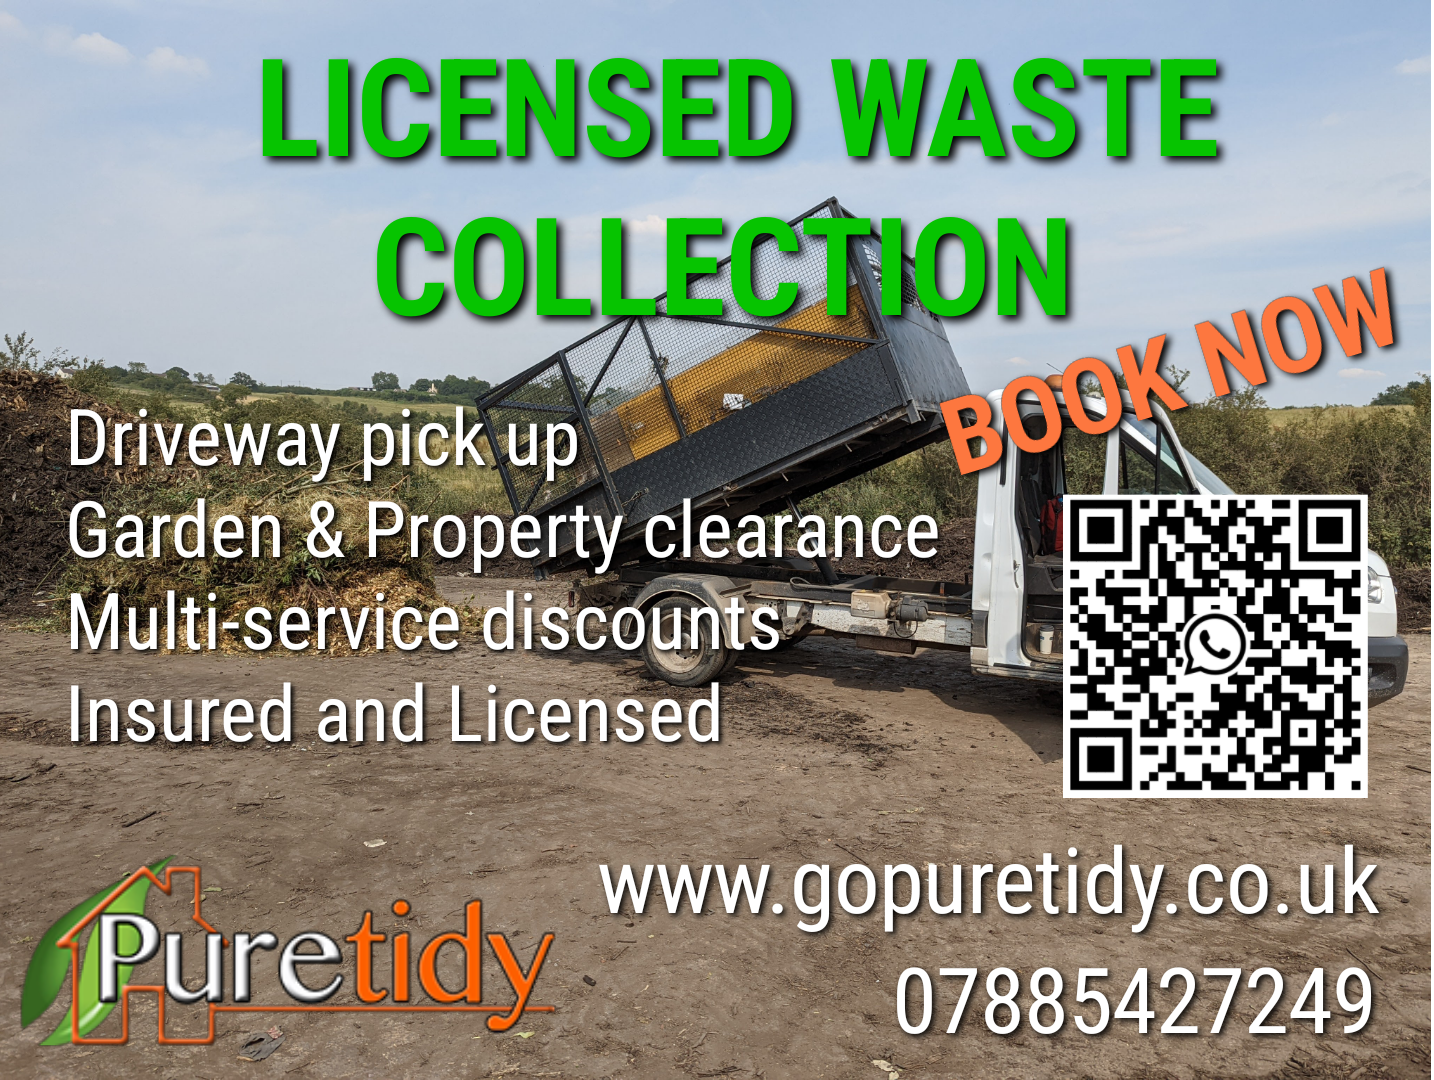 waste mangement,waste collection,rubbish,rubbish collection,tipper, man with van,cheaper than a skip,scrap metal,recycling,clearance,removals,Garden clearance,property clearance,charity,free,Swindon,Cirencester,Marlborugh,Wanborough,Lambourne,Cricklade